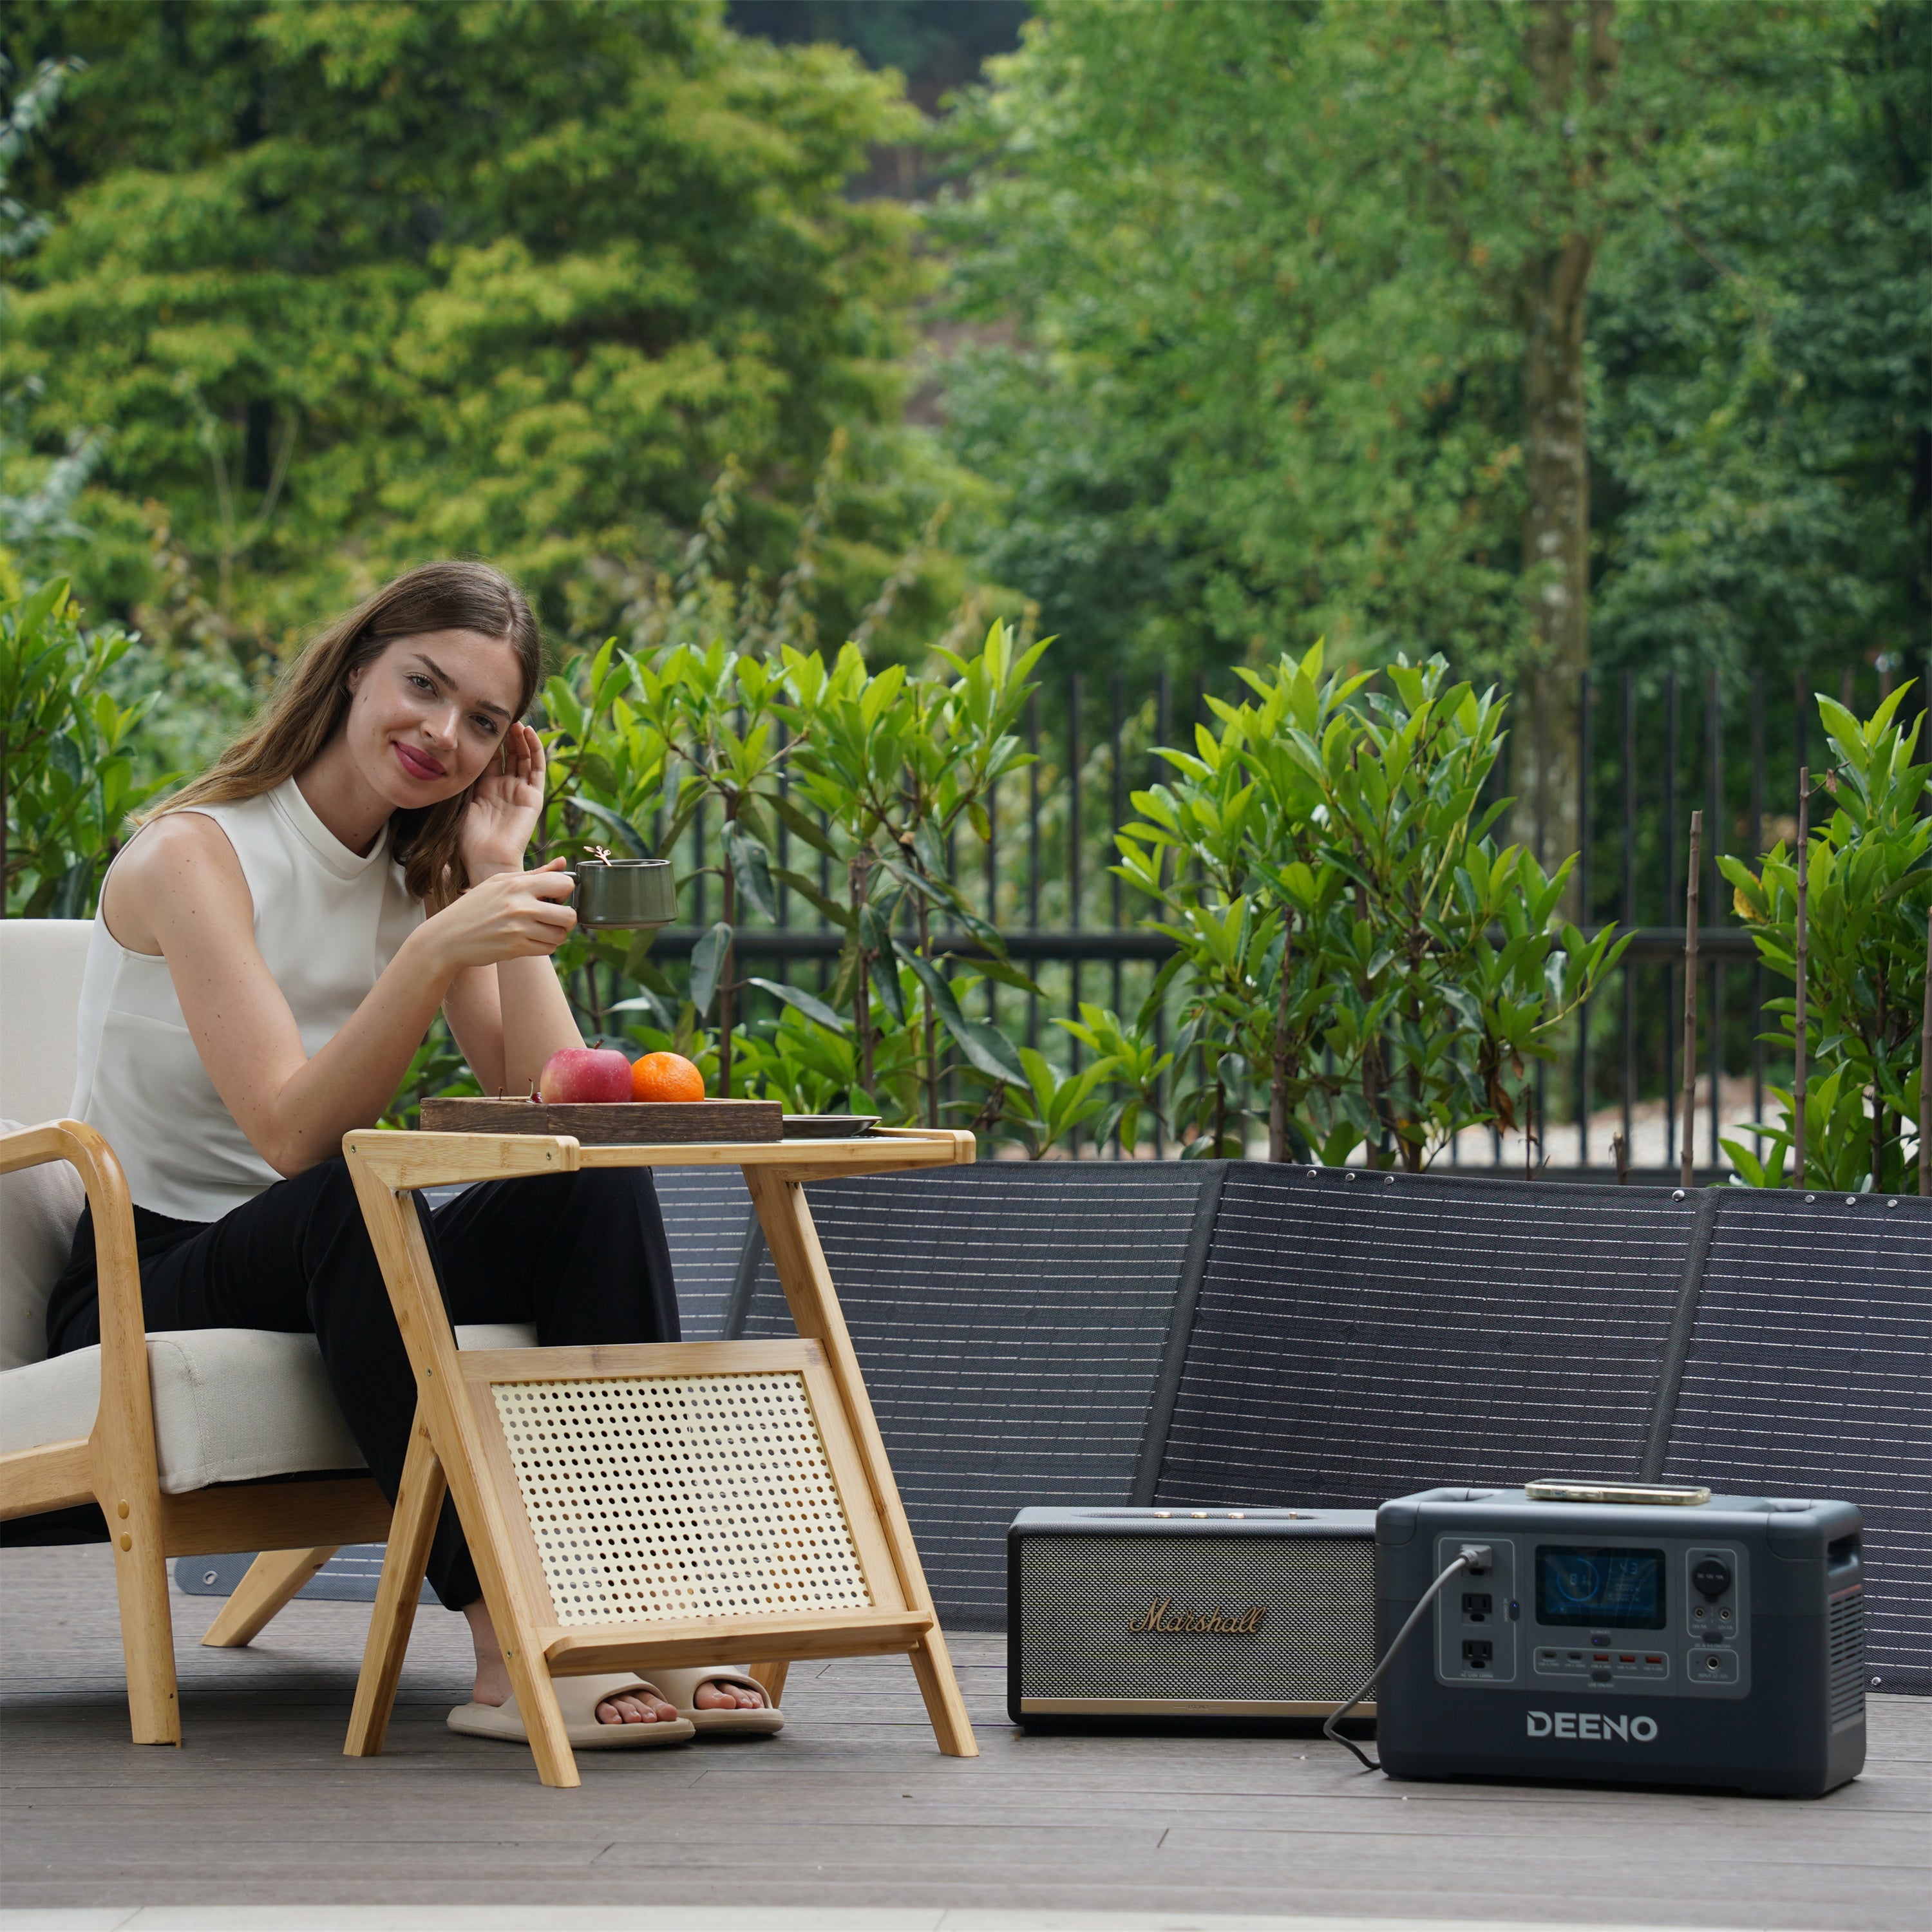 Harnessing the Power of the Sun: The DEENO 200W Portable Solar Panel